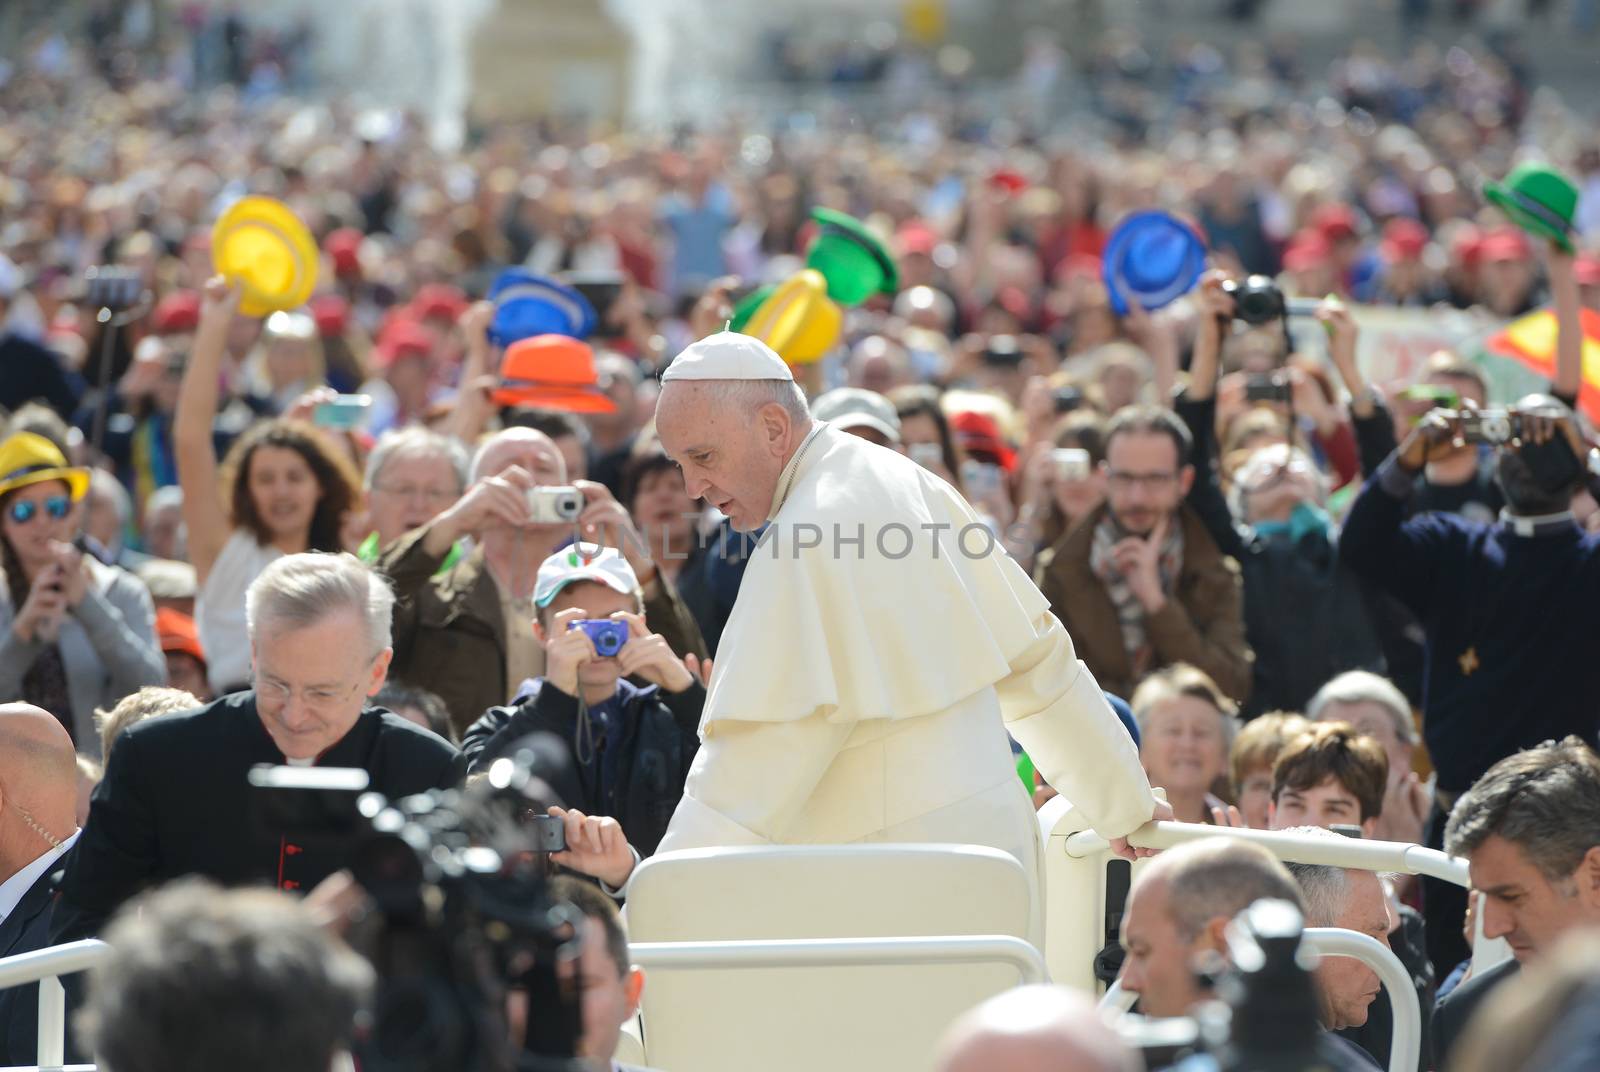 VATICAN, Rome: A crowd looks on as Pope Francis rides in the Pope Mobile at his weekly general audience in St. Peter's Square, at the Vatican on April 13, 2016.The Pope's message was that Jesus is a good doctor, and there is no sickness he cannot cure. He went on to mention how Jesus got sinners, including St. Matthew, to follow him and be disciples. 